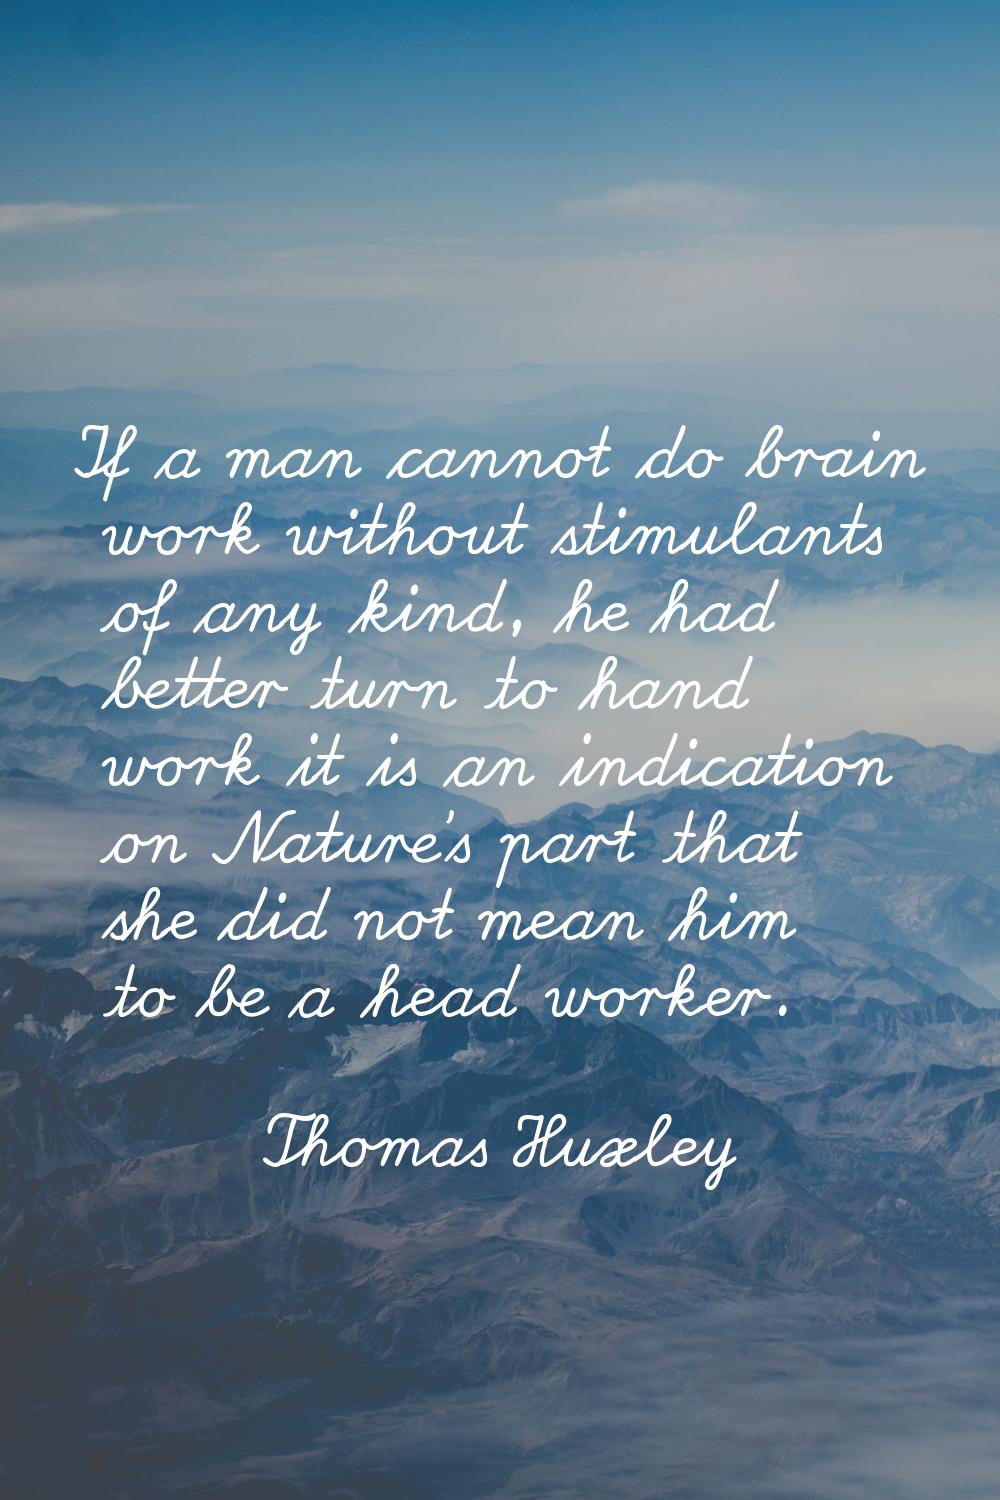 If a man cannot do brain work without stimulants of any kind, he had better turn to hand work it is